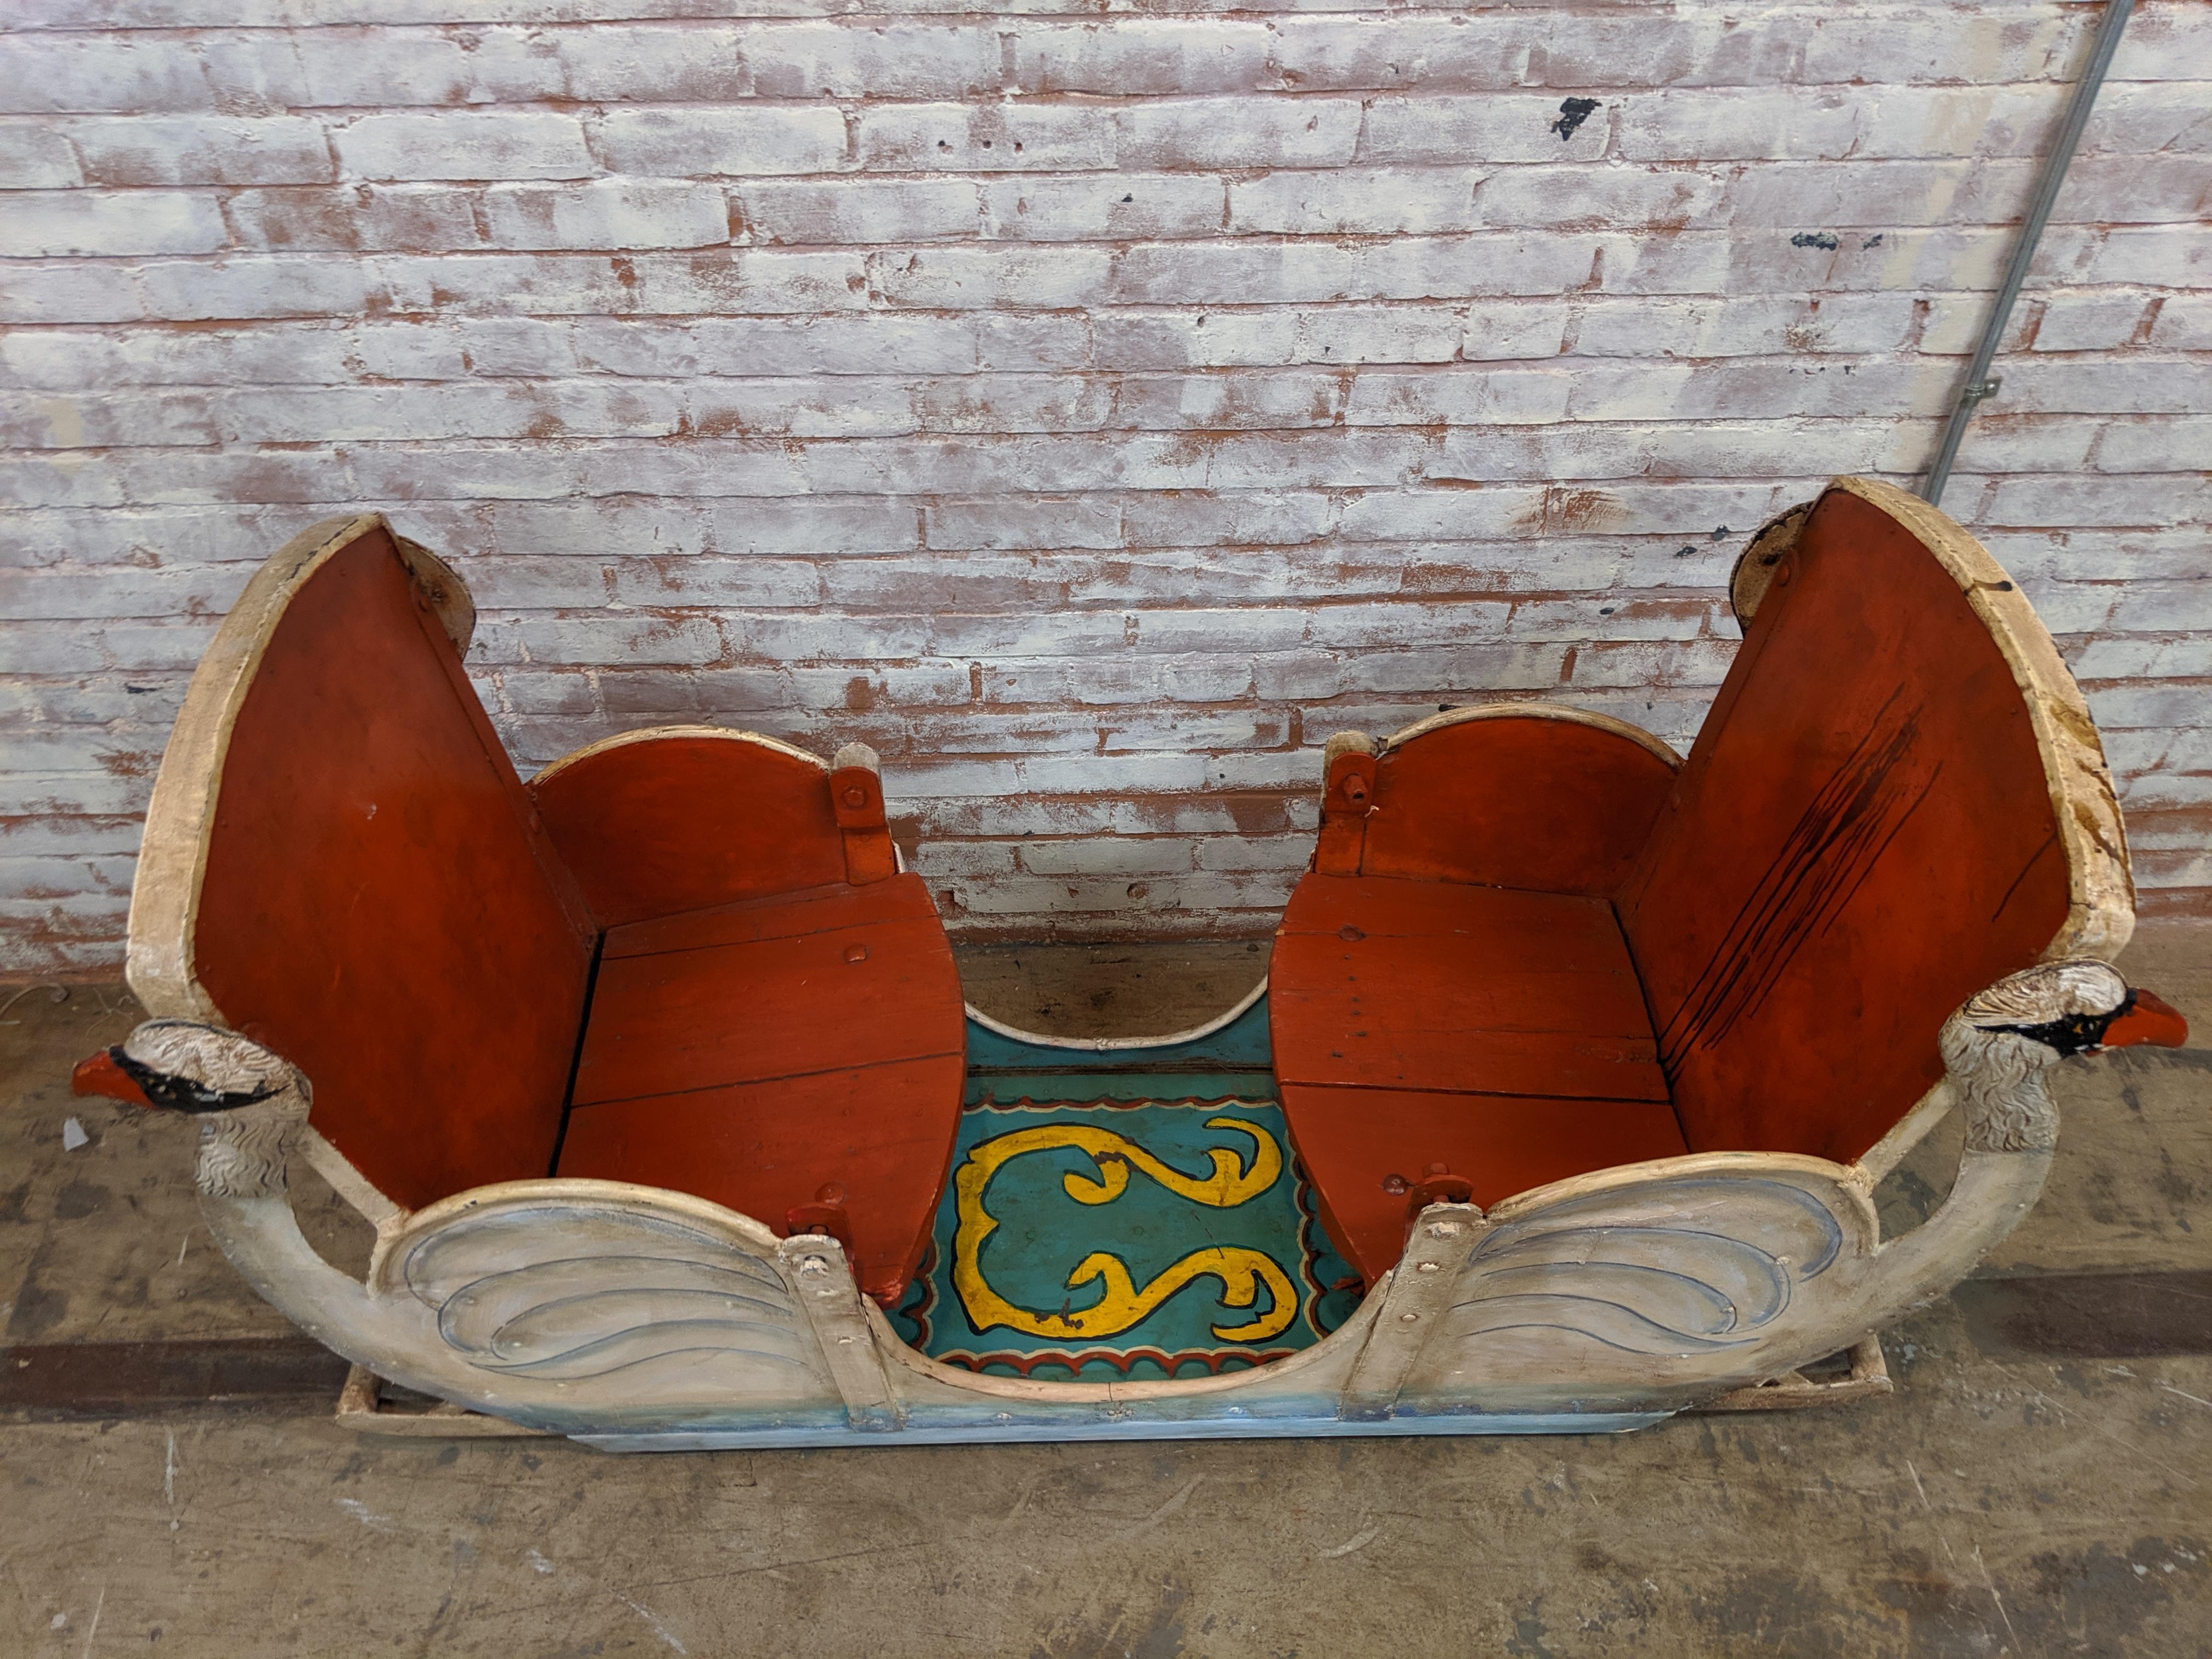 Vintage 20th century carousel seat with swan motif on all four sides. A great piece of Americana and super conversation piece. Constructed of metal and hand painted. The seats are wood but seat backs and sides are metal. Great piece to fill with